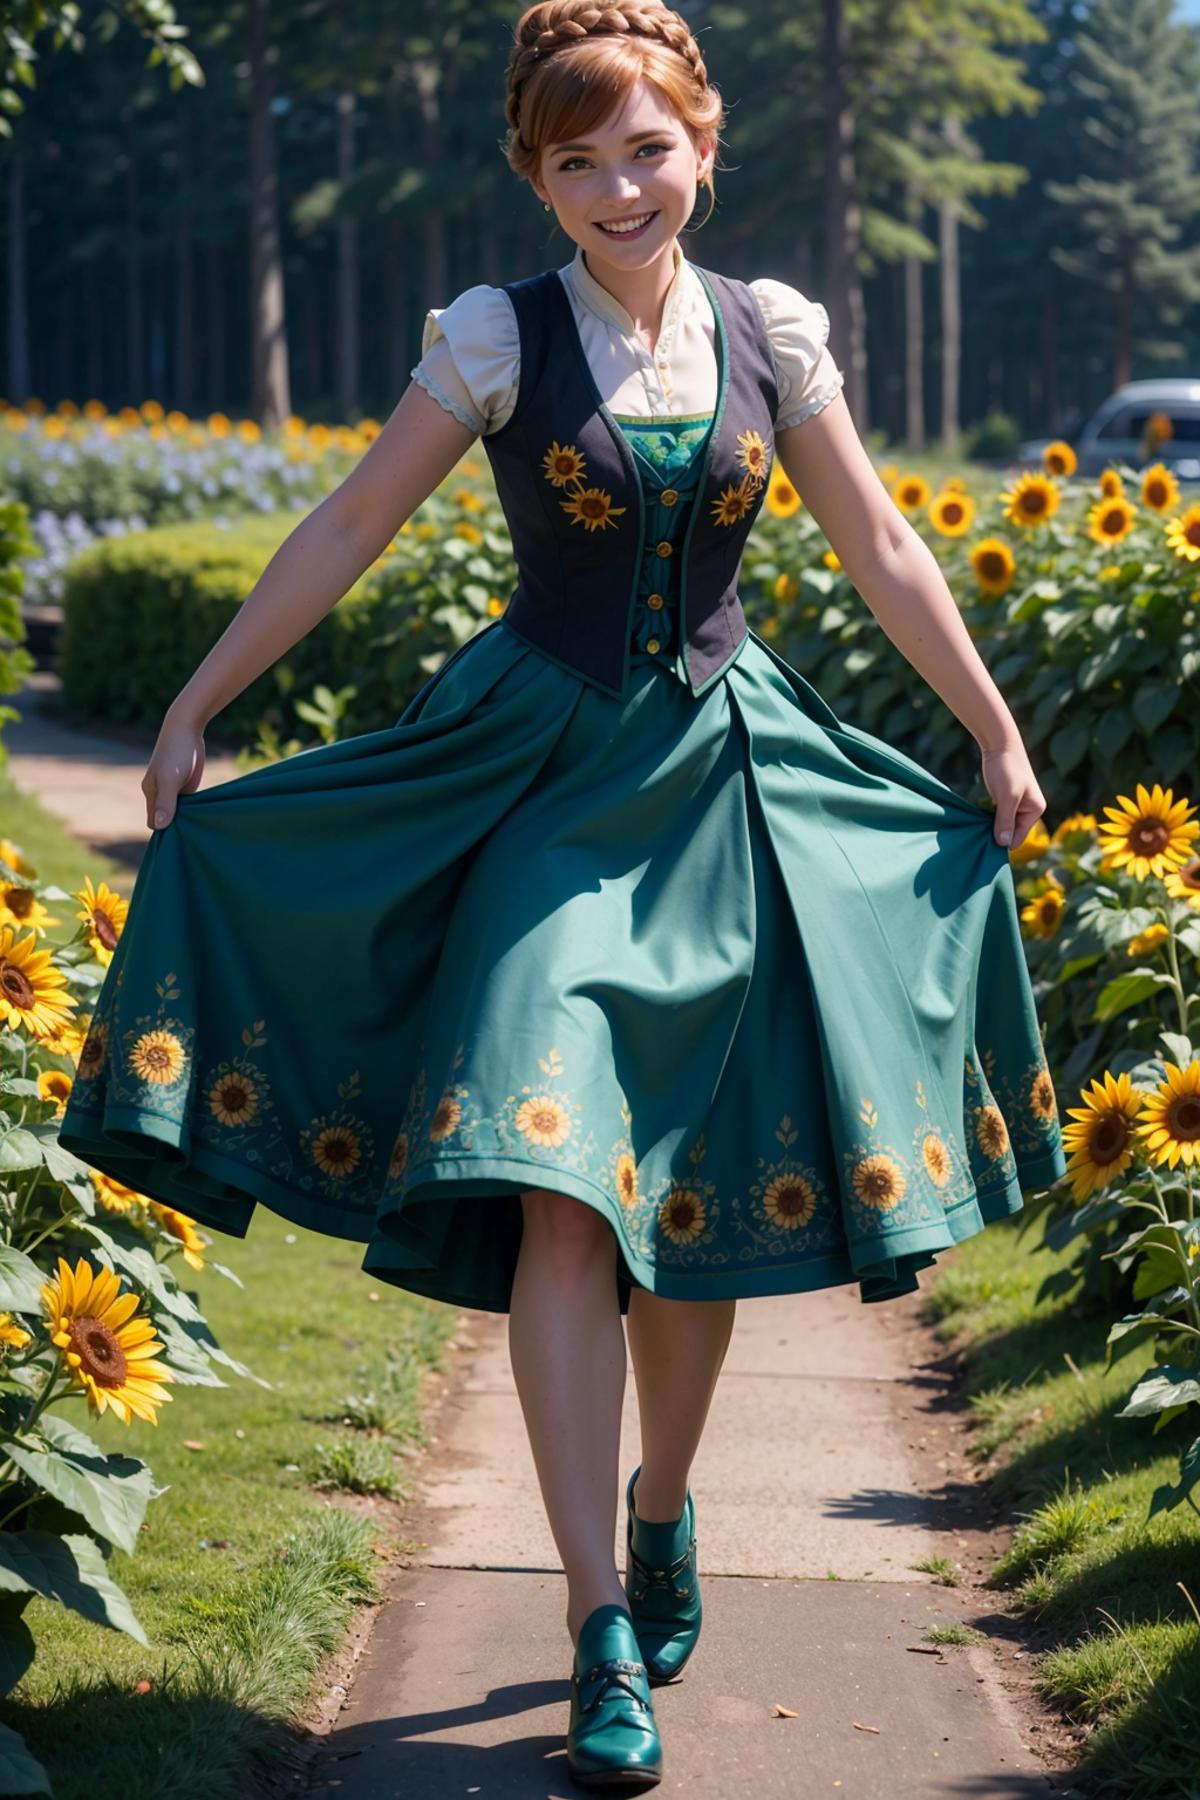 A woman in a green dress with sunflowers on it walking down a path.